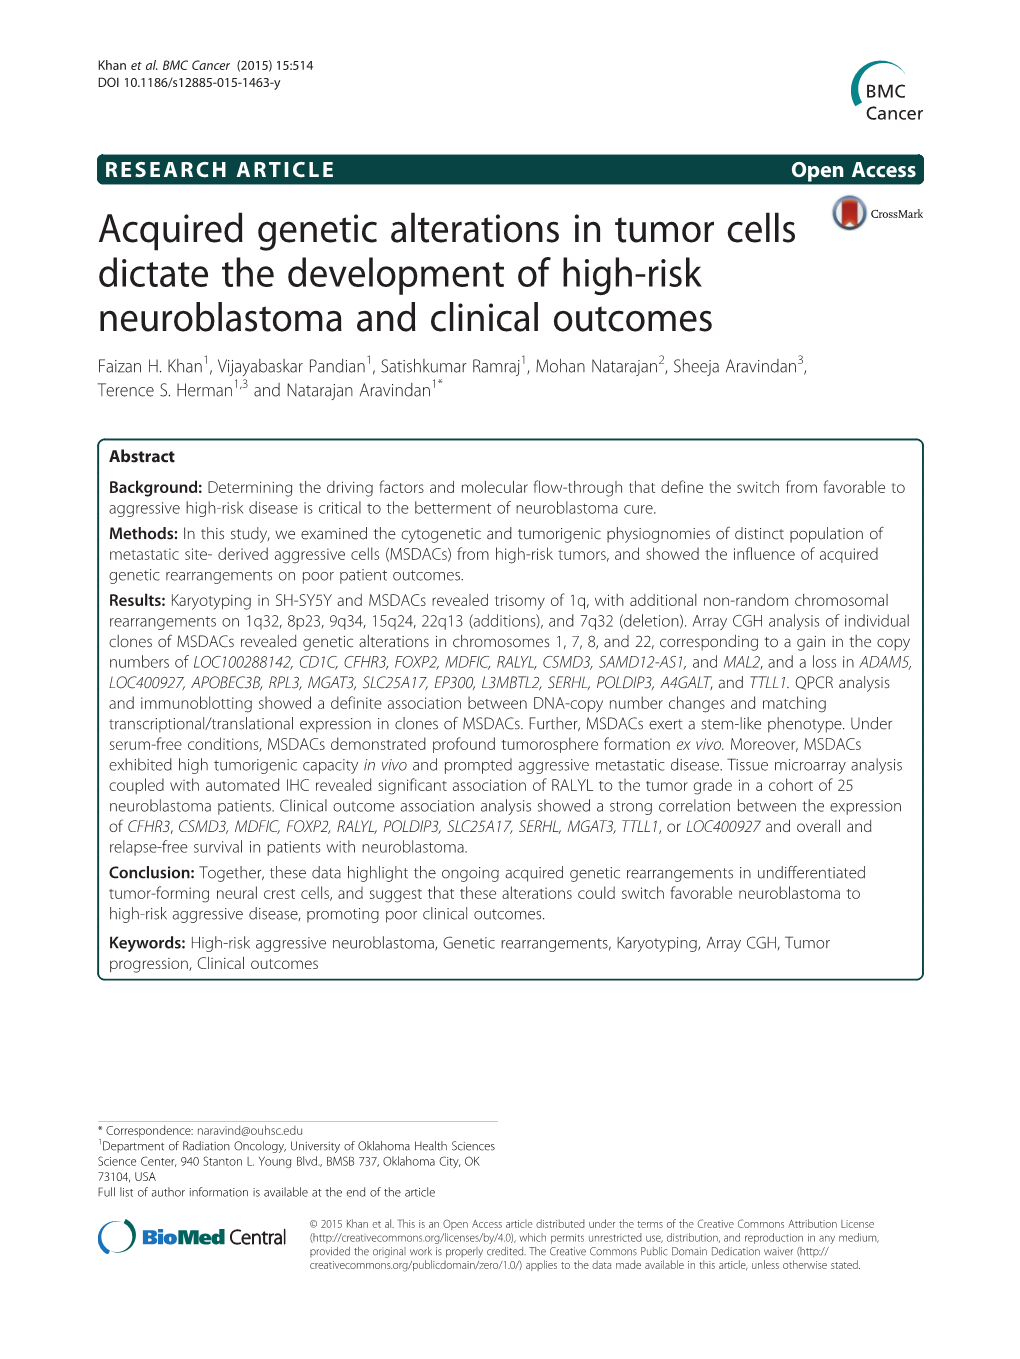 Acquired Genetic Alterations in Tumor Cells Dictate the Development of High-Risk Neuroblastoma and Clinical Outcomes Faizan H